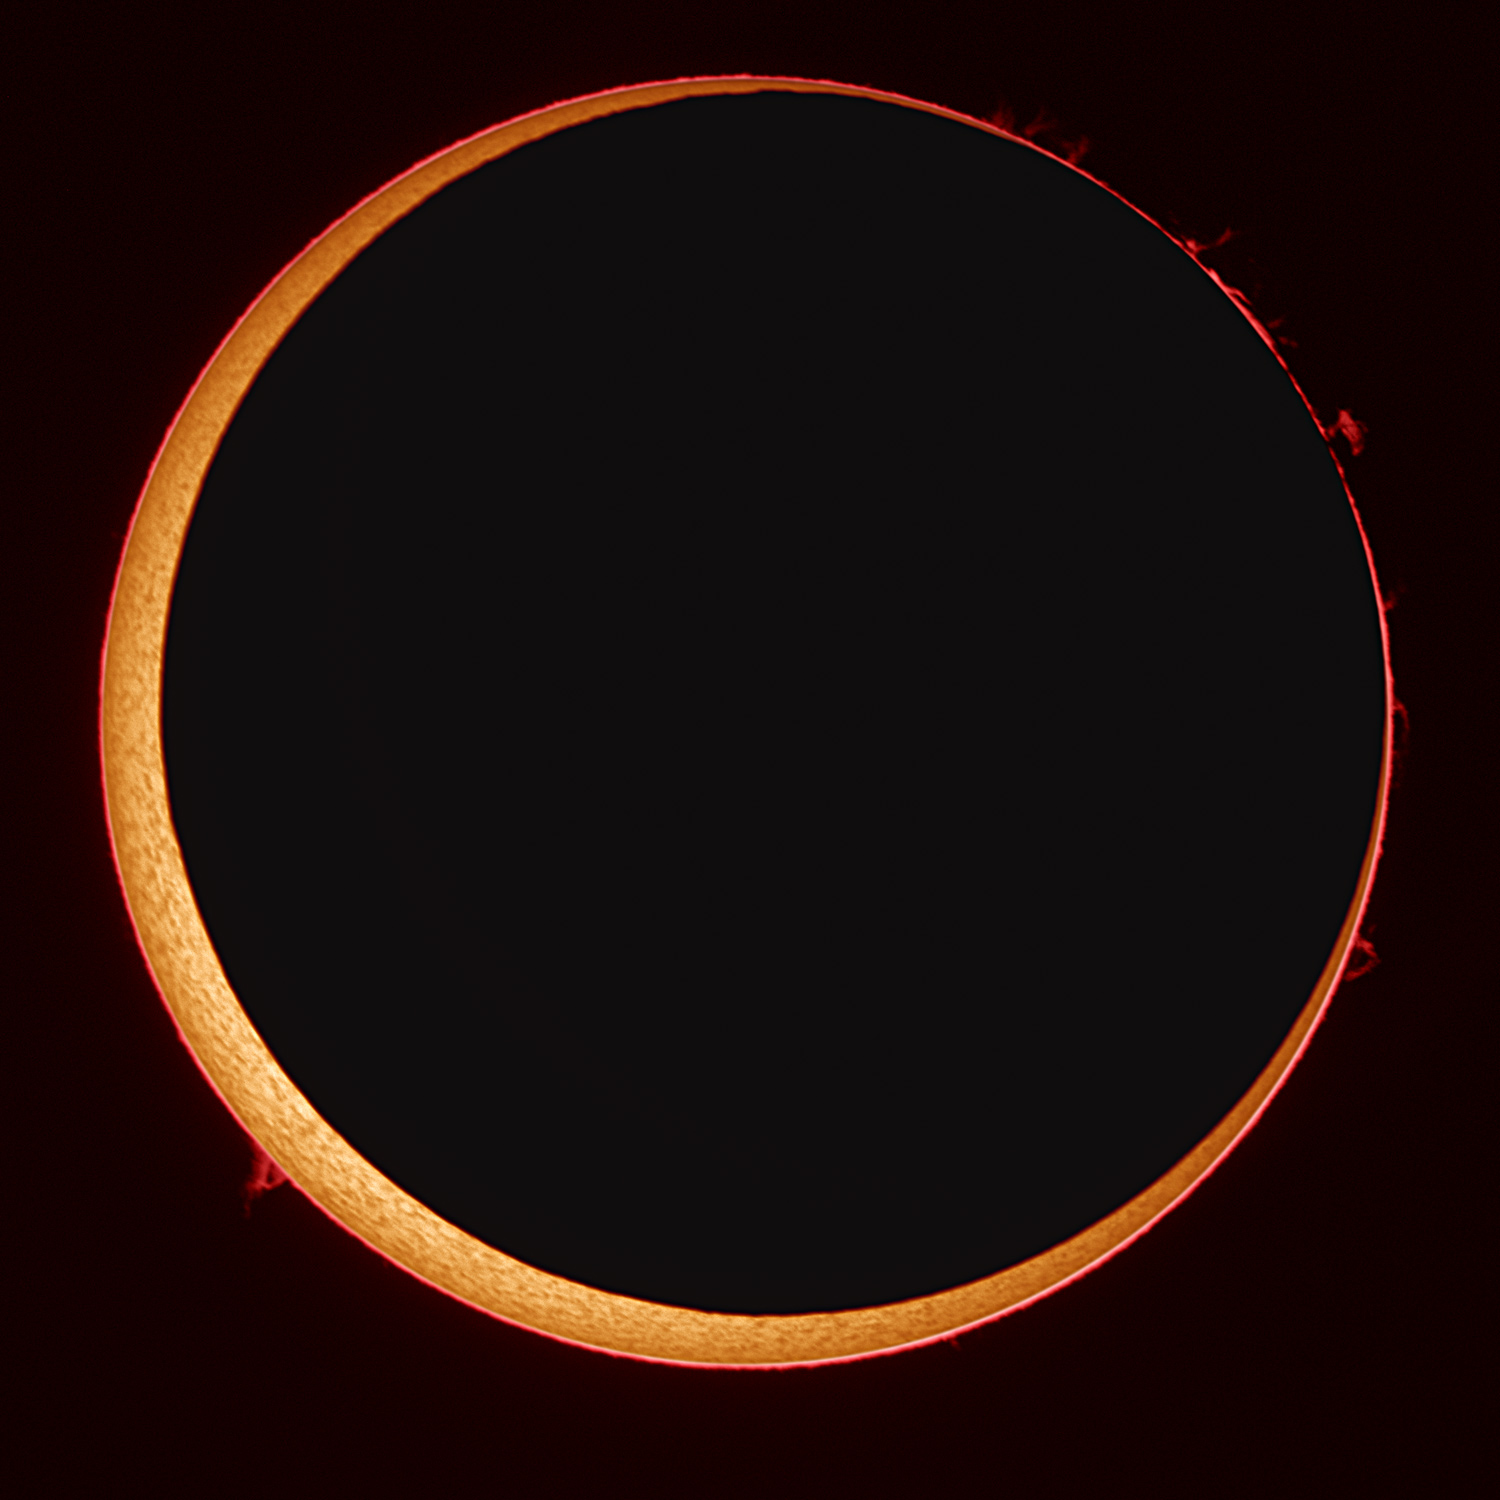 The rundown on this week’s ‘ring of fire’ eclipse